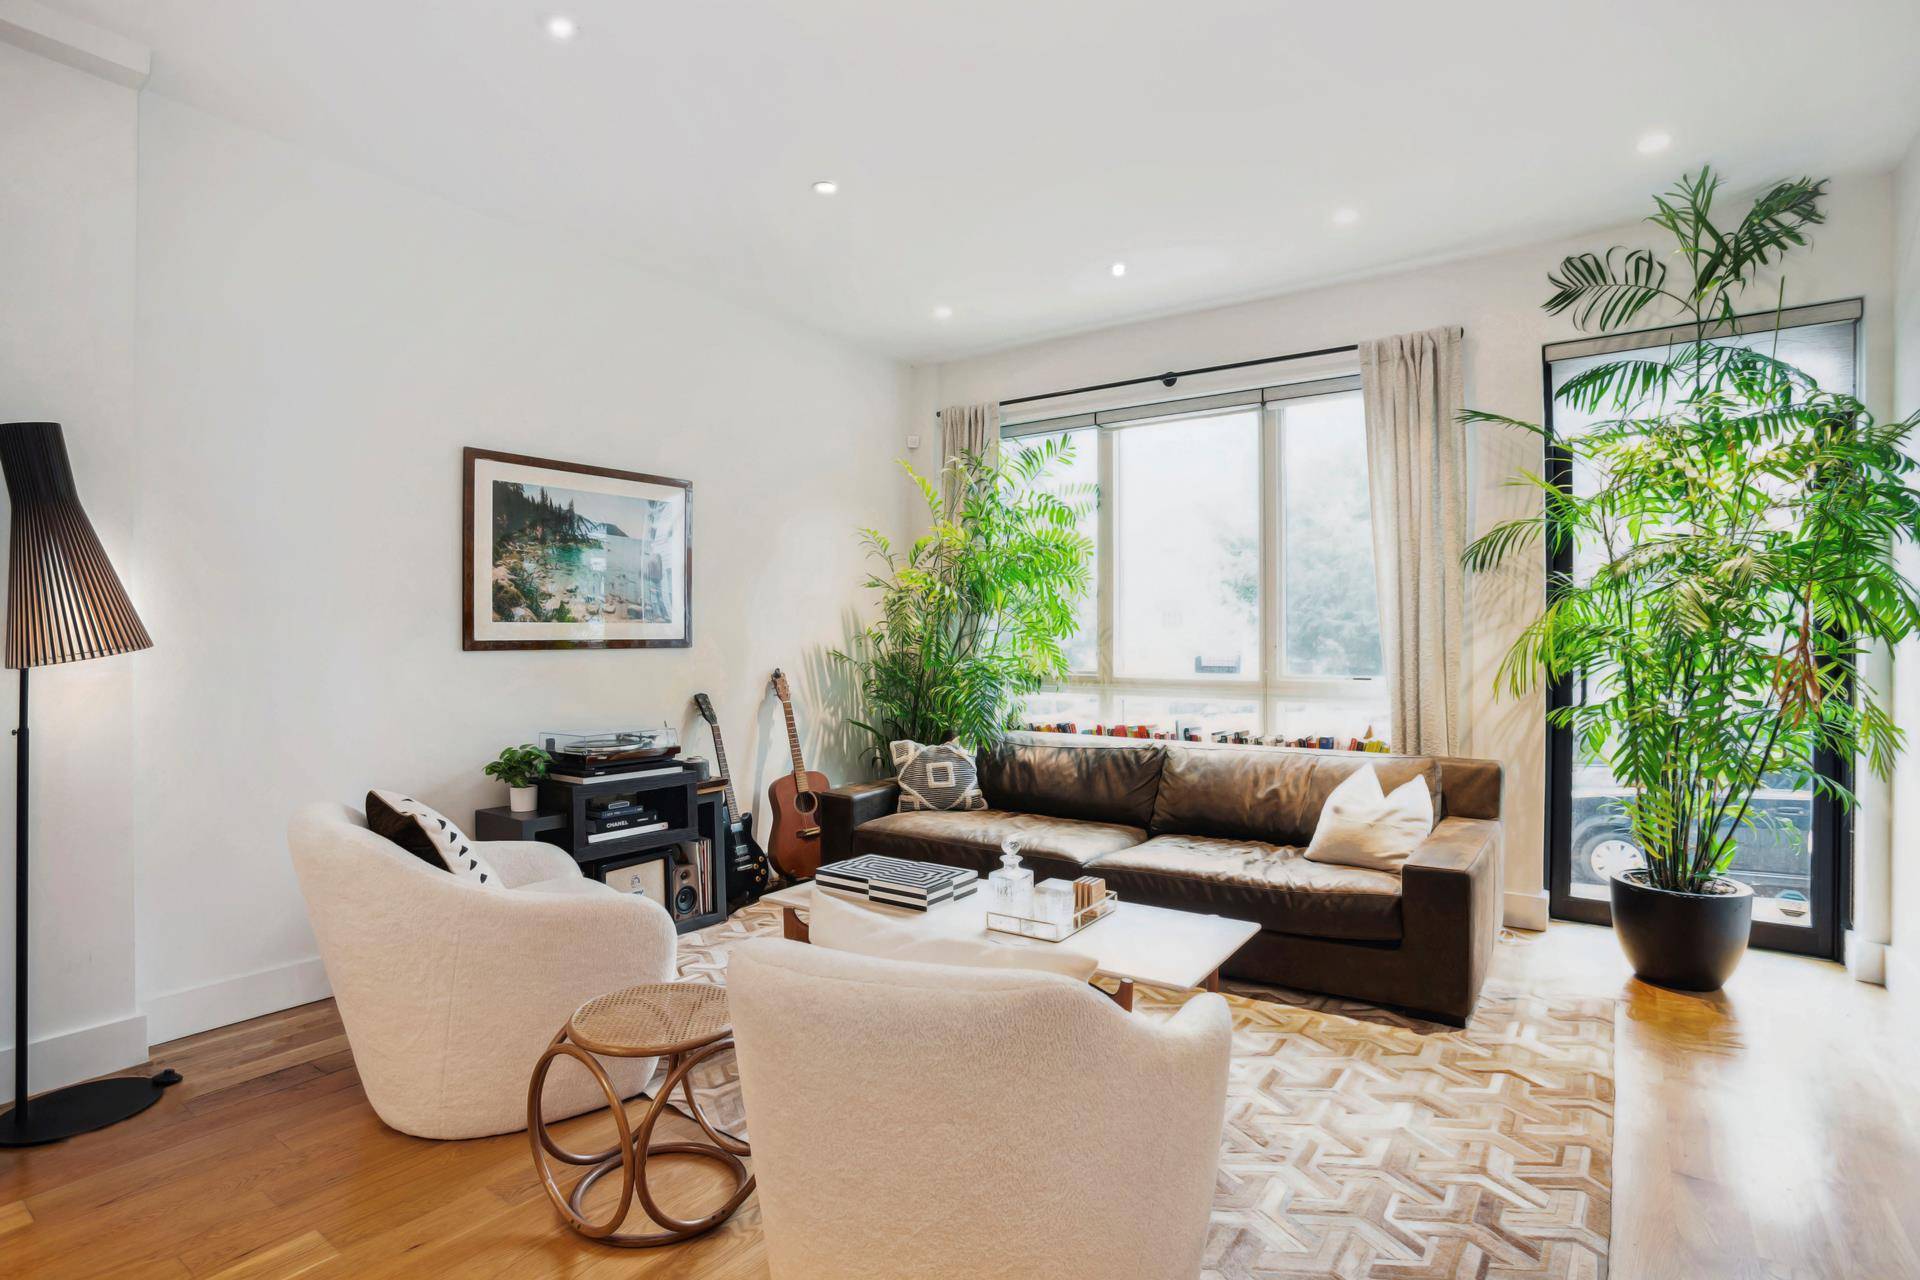 The perfect combination of indoor and outdoor living in an intimate new boutique condo development built in 2020 in the sought after Greenwood section of Park Slope.